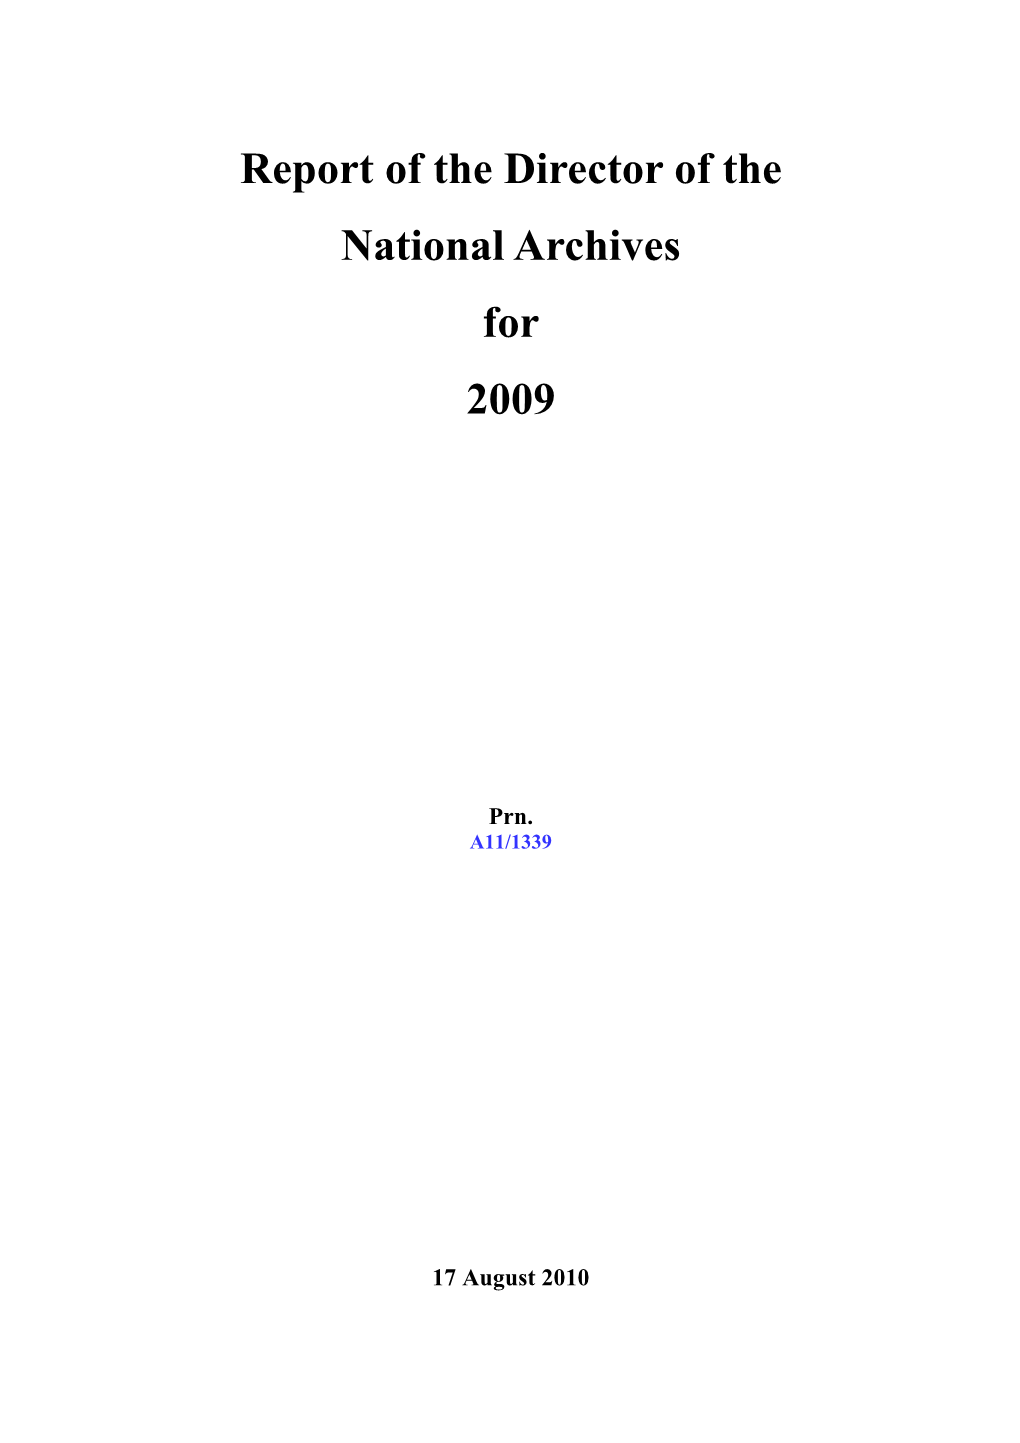 Report of the Director of the National Archives for 2009